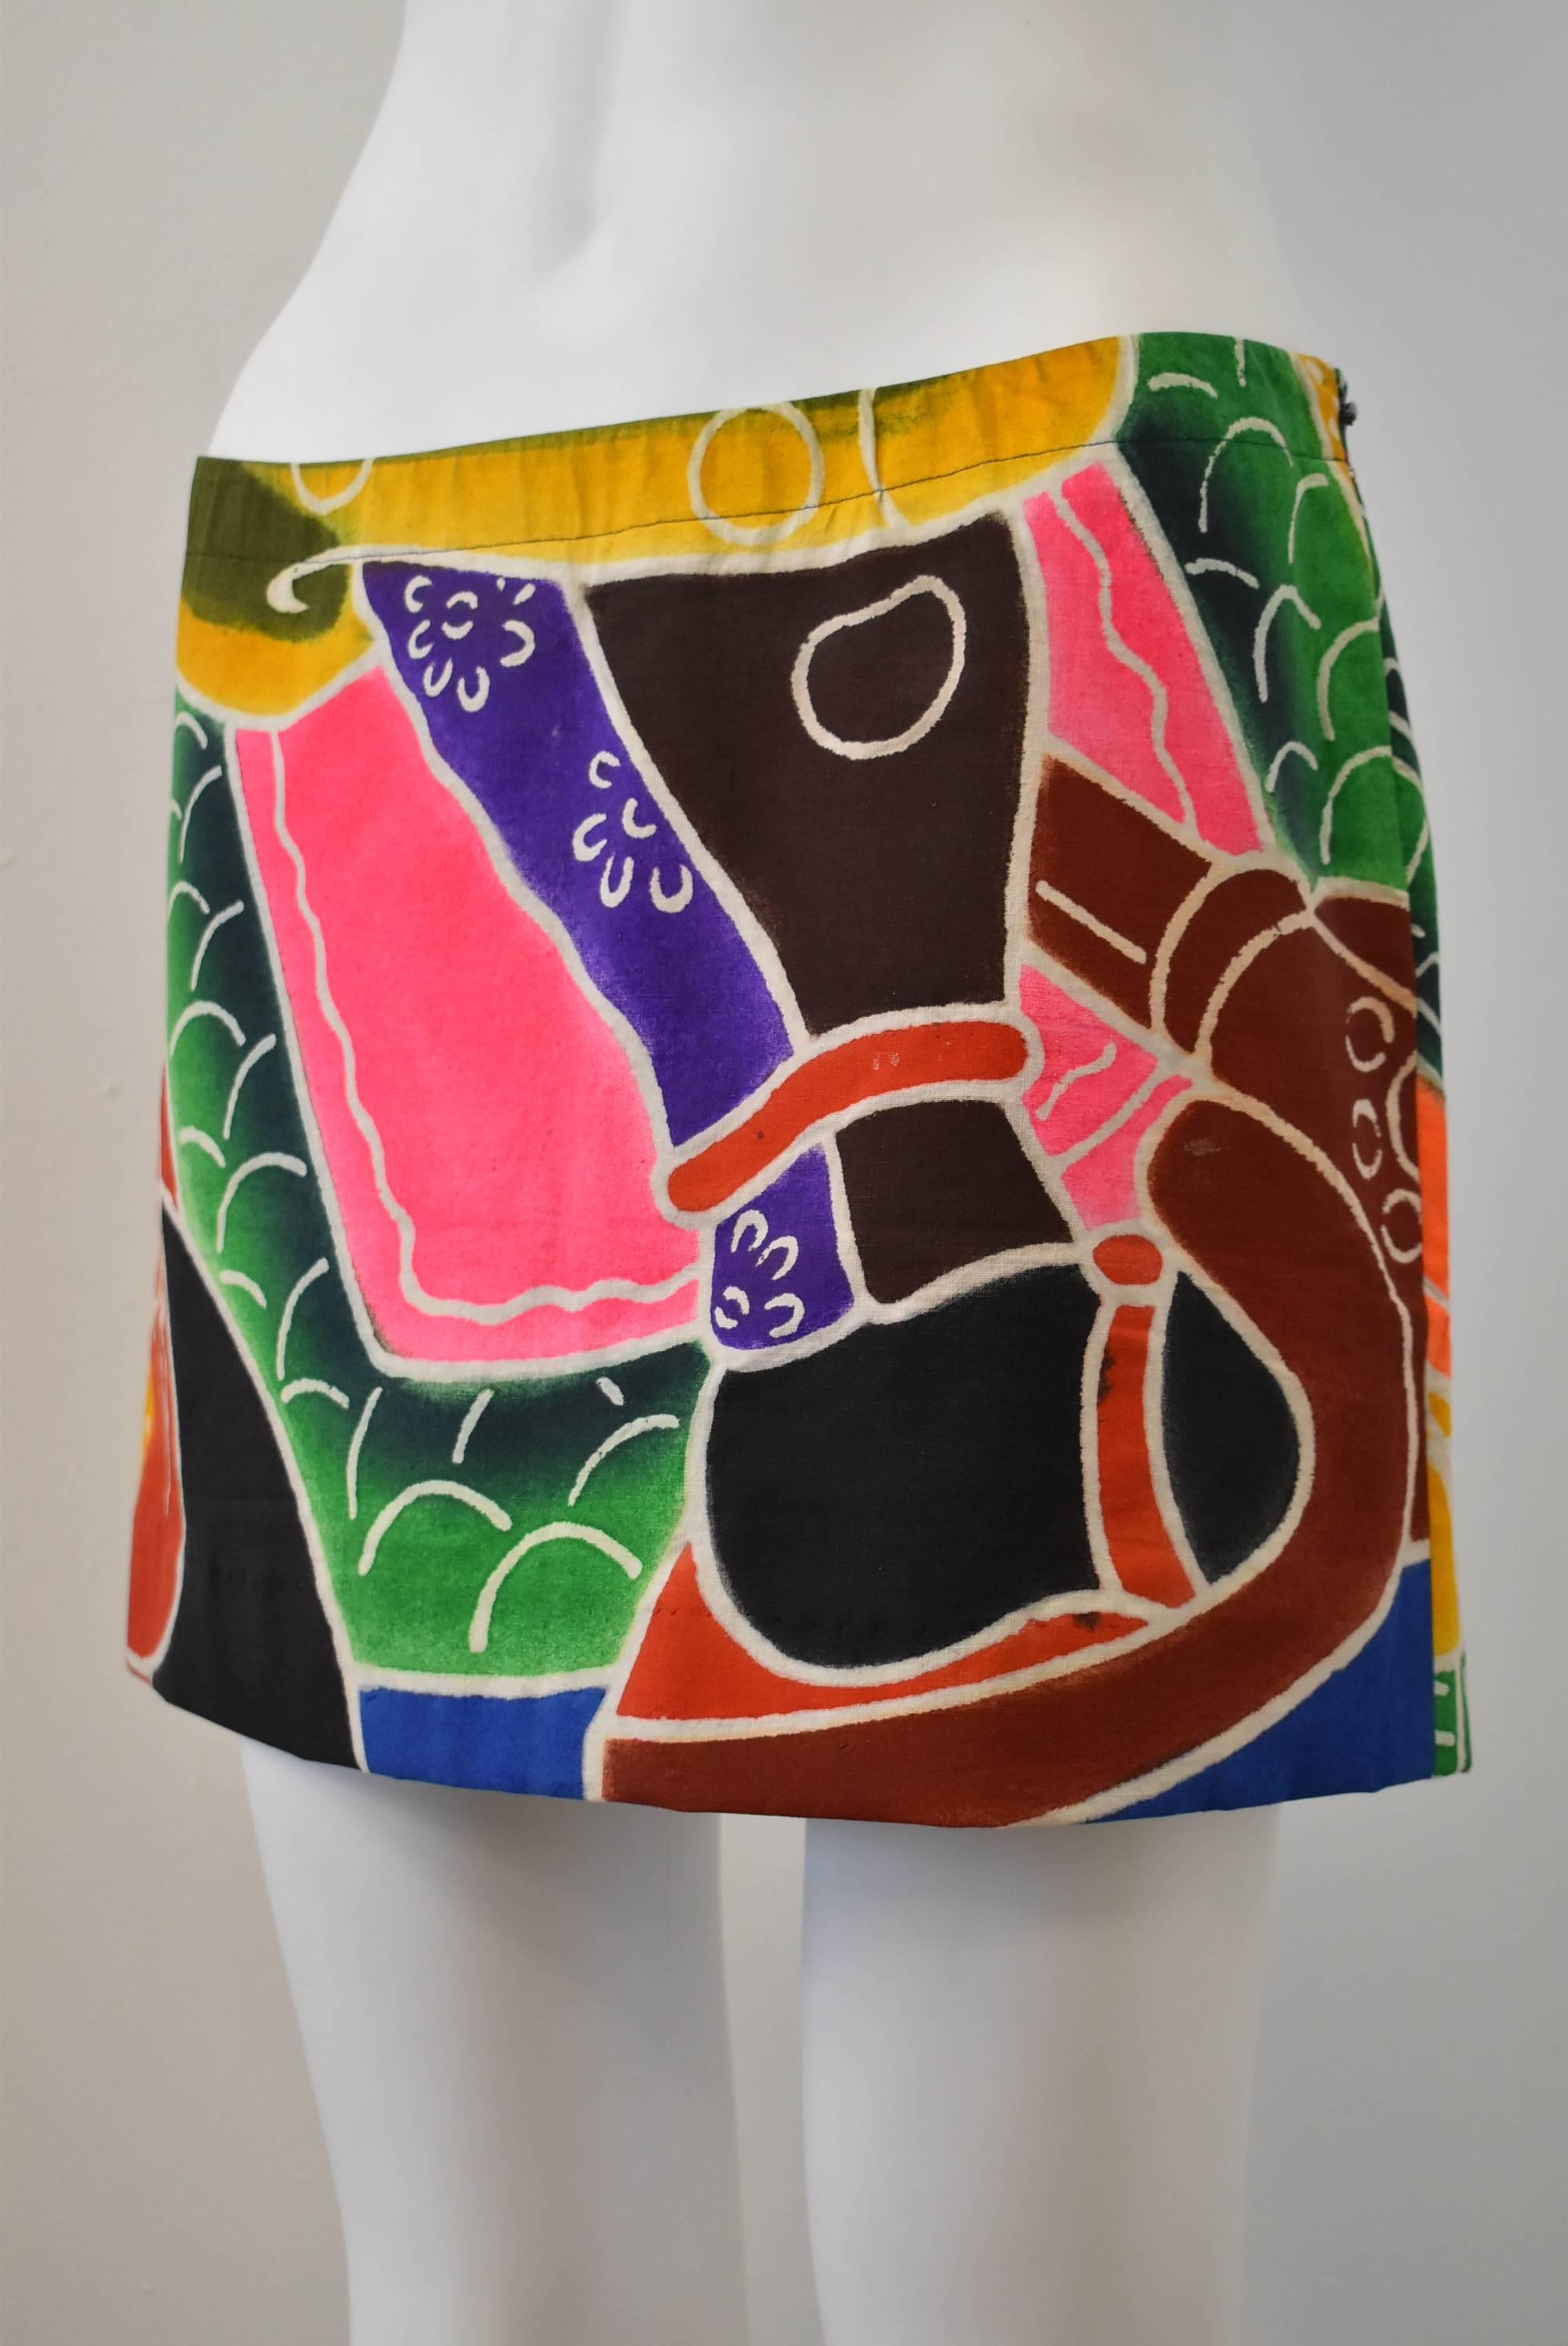 A beautiful and unique hand painted mini skirt from Japanese designer Junko Shimada. The simple mini skirt is made from a traditional hand-painted Japanese festival banner with multi-coloured patterns and shapes. There is a detail of a samurai’s leg